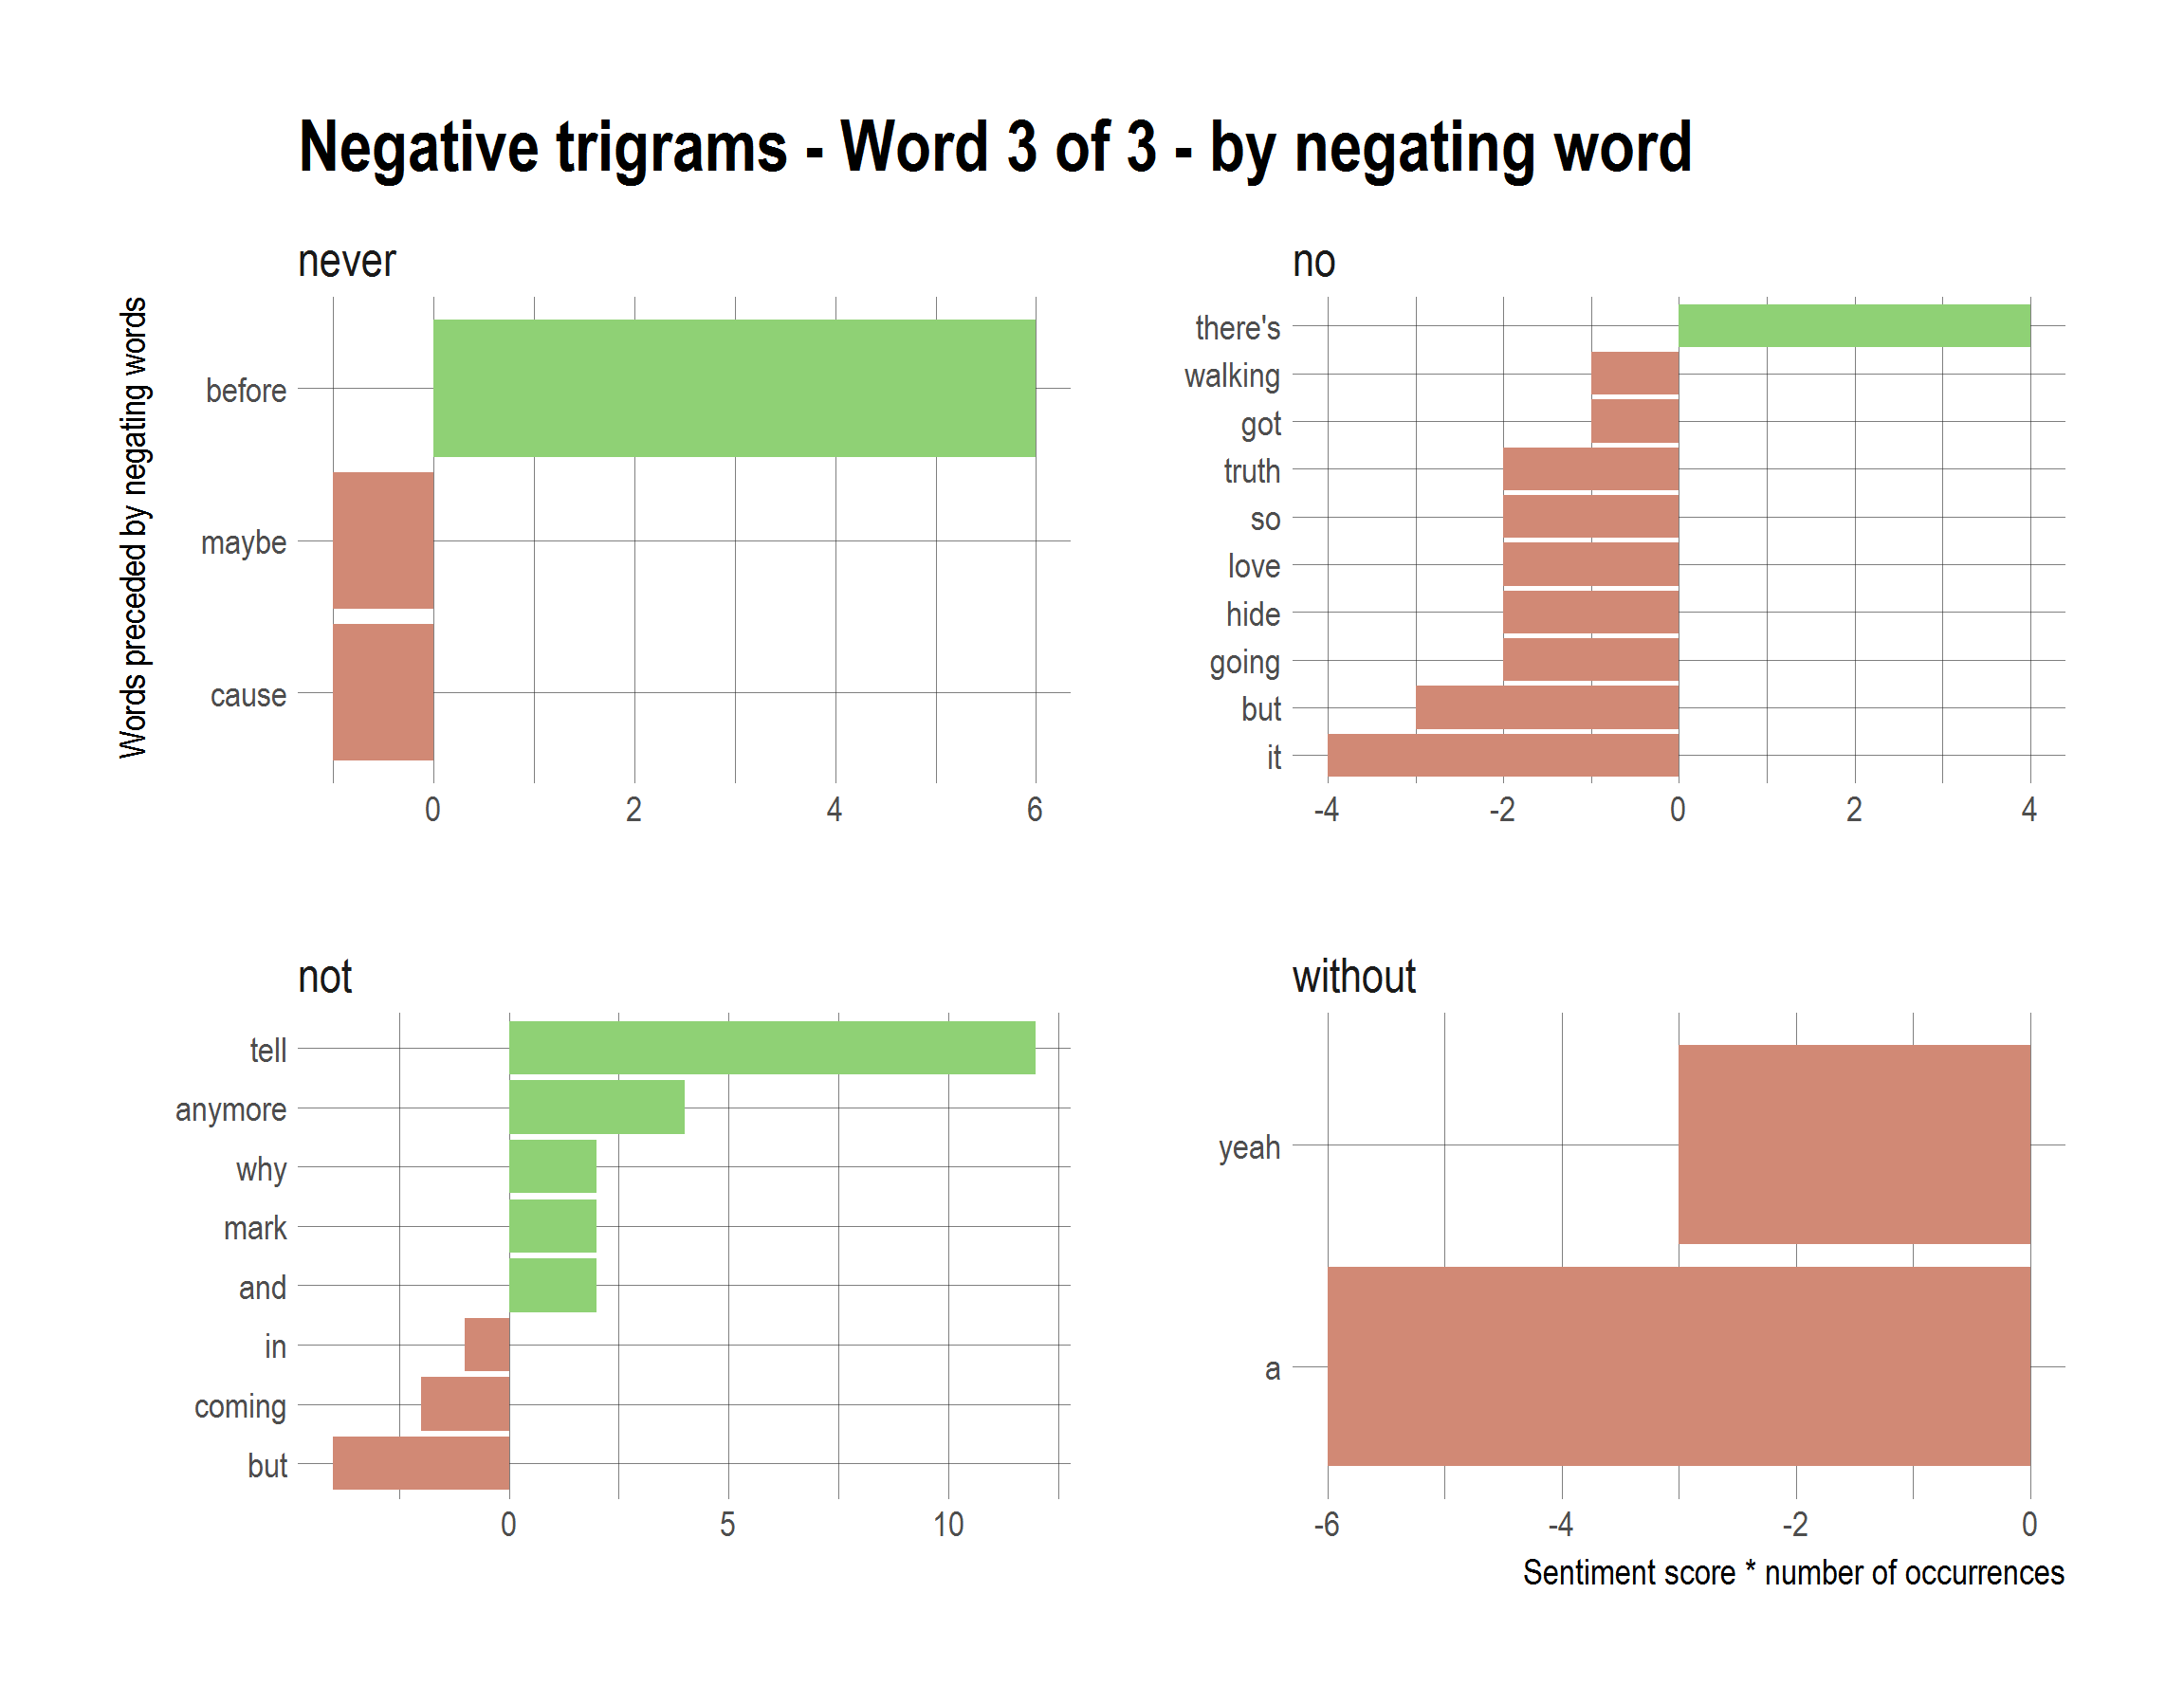 2017-10-22-Negative-trigrams-Word-3-of-3-by-negating-word.png